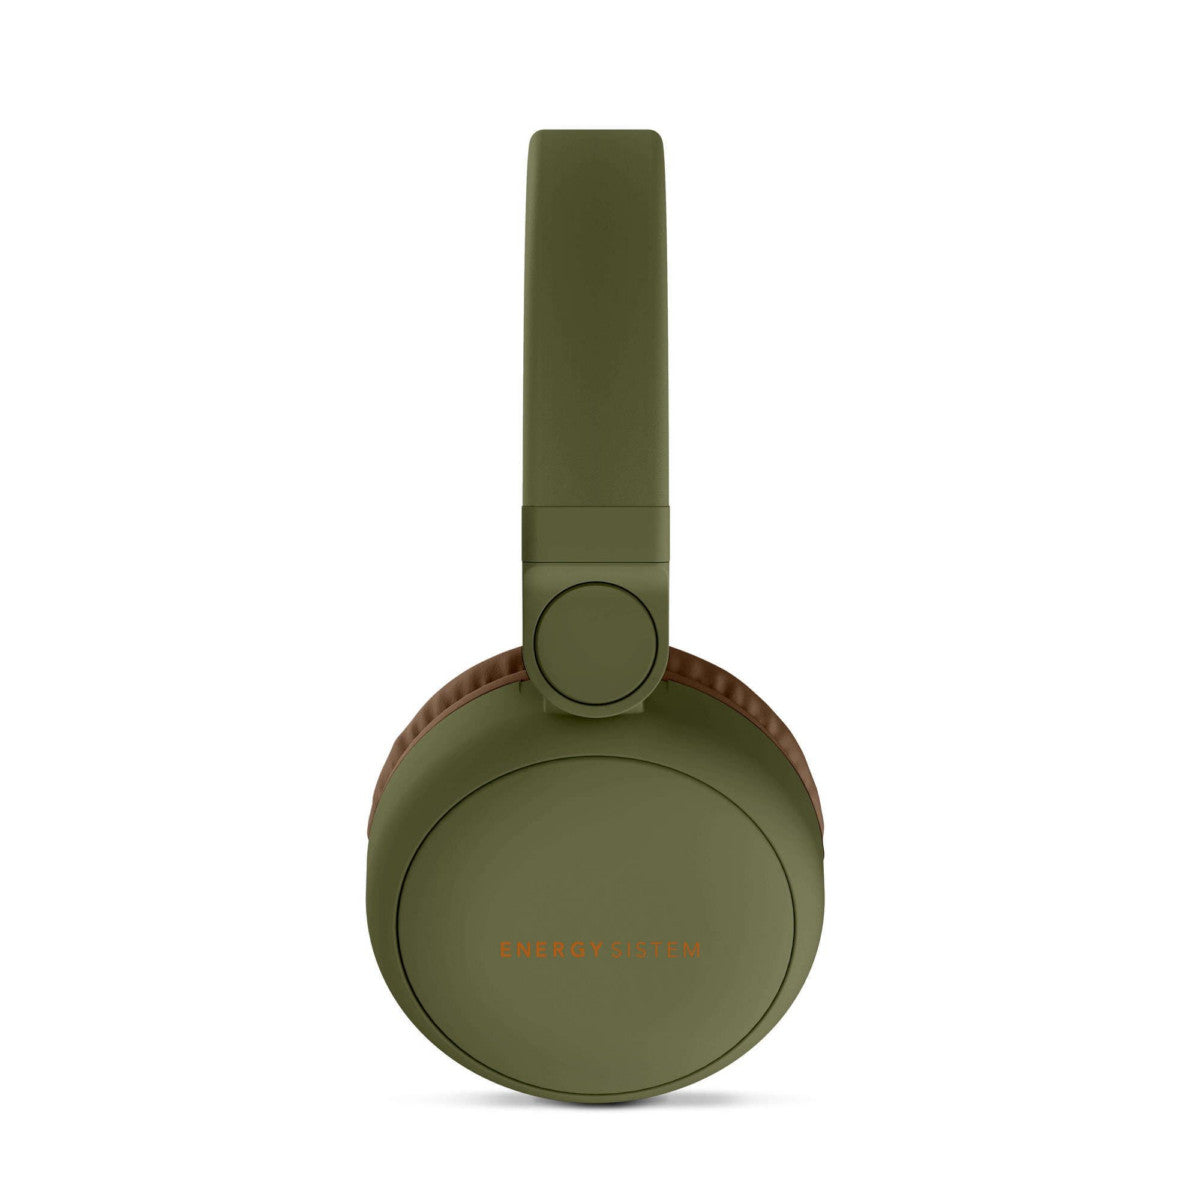 Energy Sistem Headphones 2 445615 Wired and Wireless Bluetooth Green